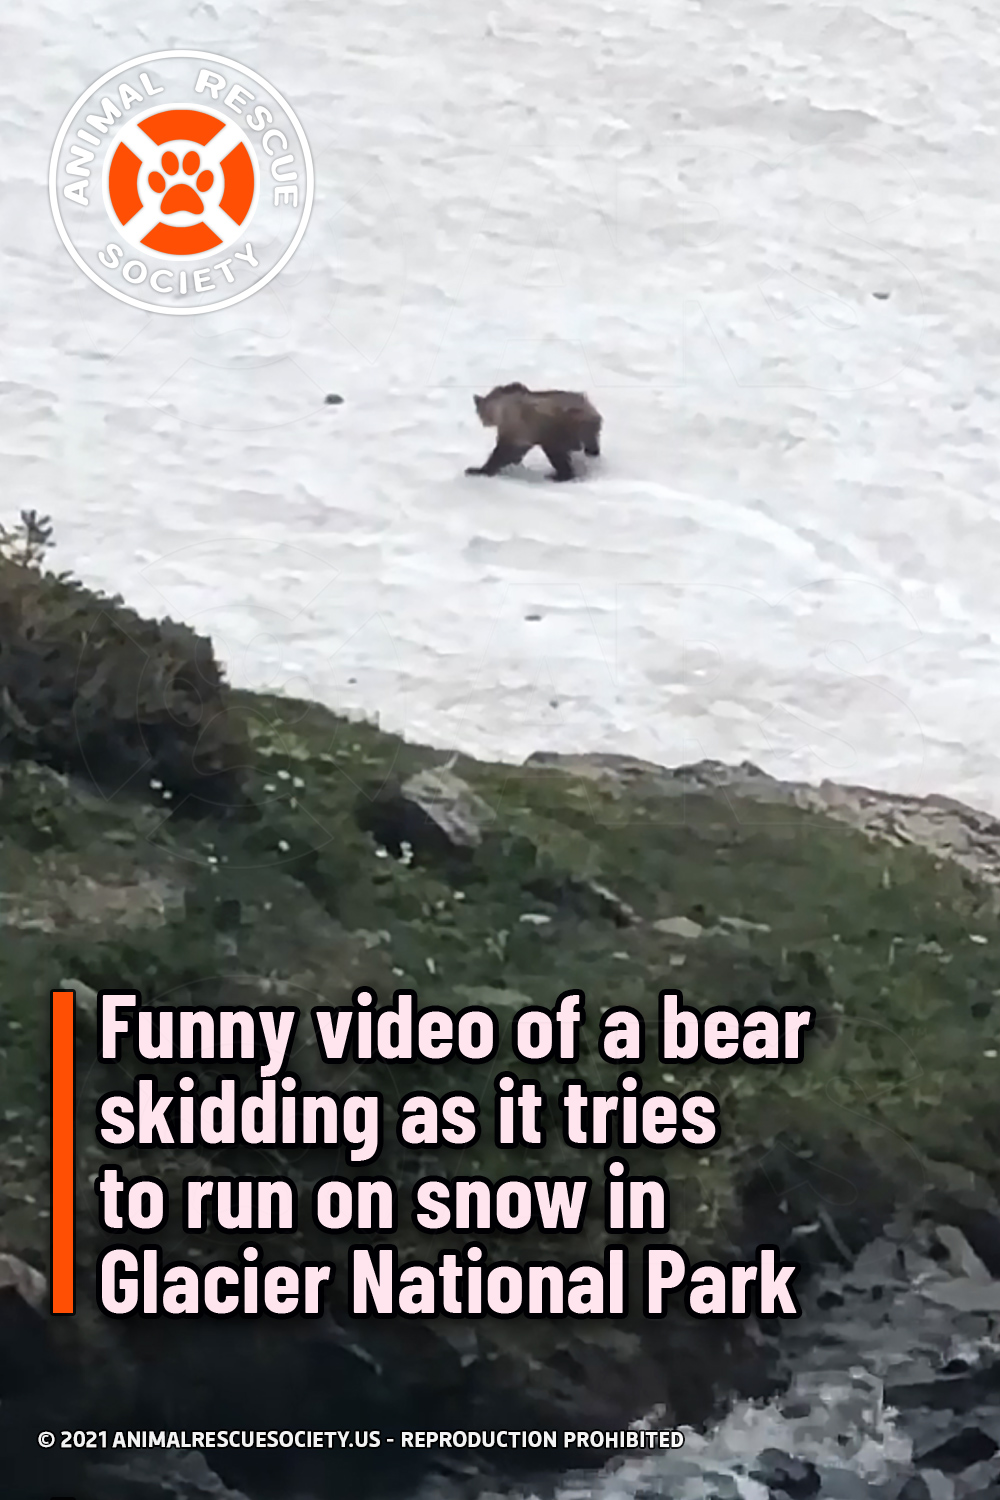 Funny video of a bear skidding as it tries to run on snow in Glacier National Park